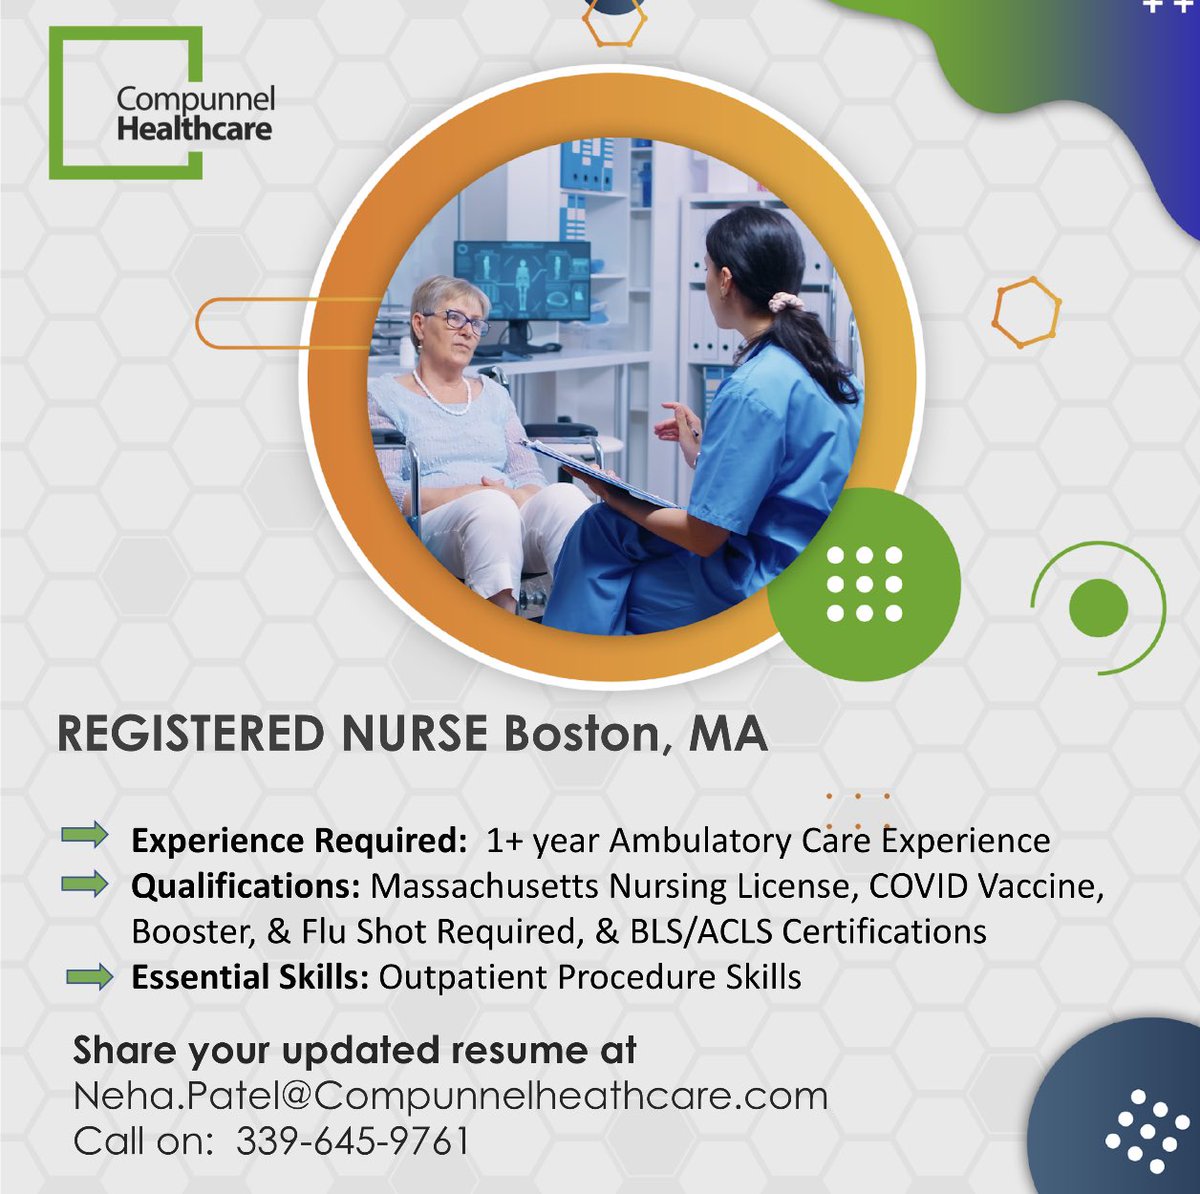 Registered Nurse Positions Available* in Boston, MA ⚕️ 

*Contract Job

Internal Medicine

Monday - Friday 8:30am - 5pm 

If interested, please contact Neha Patel at 339-645-9761 or Neha.Patel@compunnelhealthcare.com #rn #rnjobs #rncareers #registerednurse